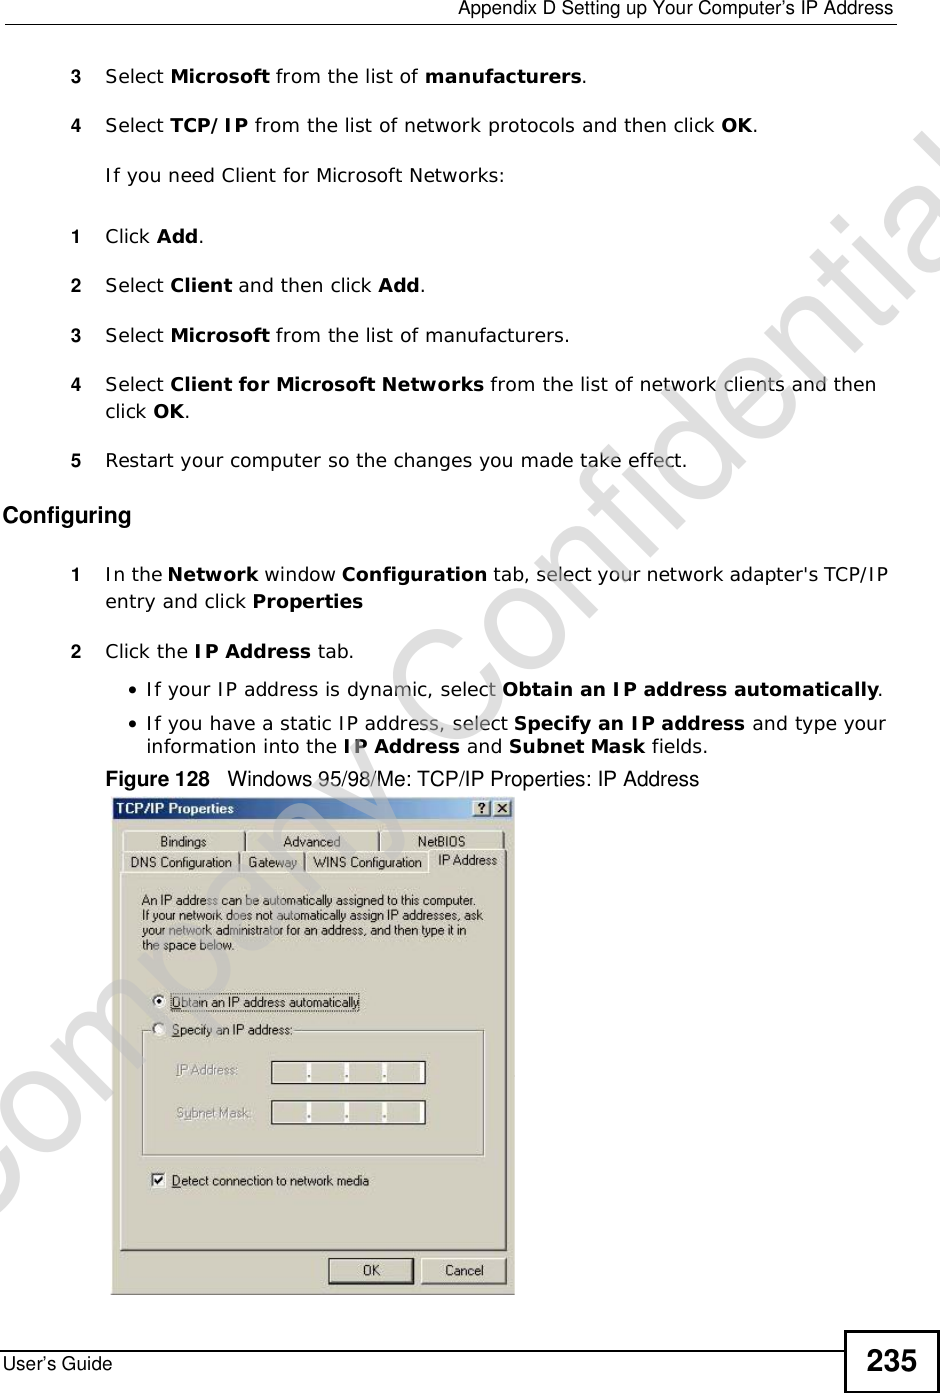  Appendix DSetting up Your Computer’s IP AddressUser’s Guide 2353Select Microsoft from the list of manufacturers.4Select TCP/IP from the list of network protocols and then click OK.If you need Client for Microsoft Networks:1Click Add.2Select Client and then click Add.3Select Microsoft from the list of manufacturers.4Select Client for Microsoft Networks from the list of network clients and then click OK.5Restart your computer so the changes you made take effect.Configuring1In the Network window Configuration tab, select your network adapter&apos;s TCP/IP entry and click Properties2Click the IP Address tab.•If your IP address is dynamic, select Obtain an IP address automatically.•If you have a static IP address, select Specify an IP address and type your information into the IP Address and Subnet Mask fields.Figure 128   Windows 95/98/Me: TCP/IP Properties: IP AddressCompany Confidential